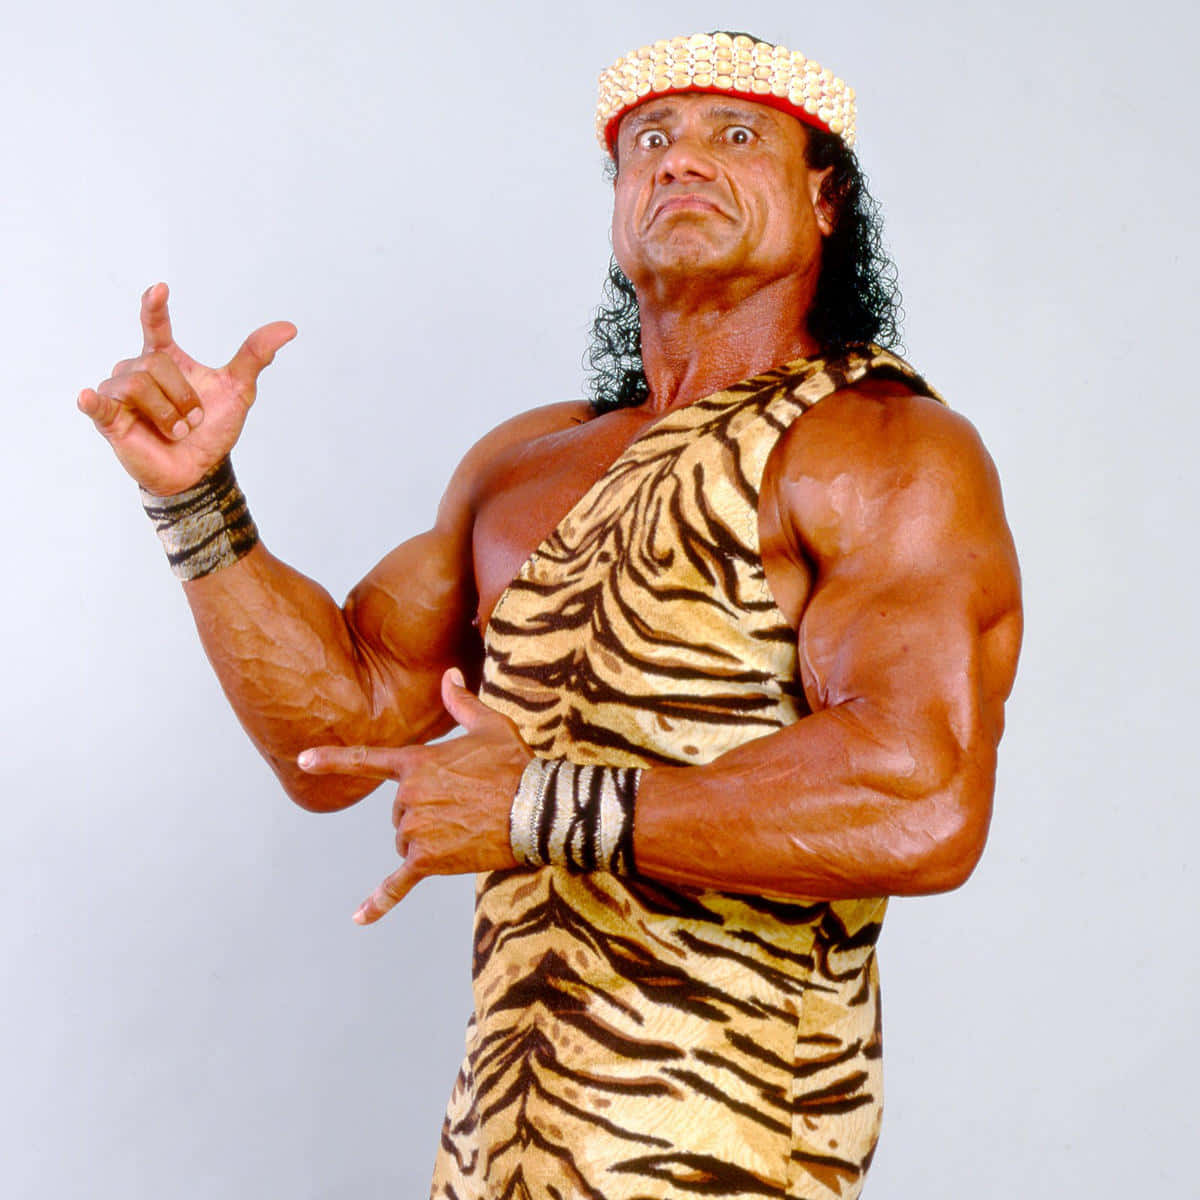 Jimmy Snuka Rock It Hand Gesture Picture